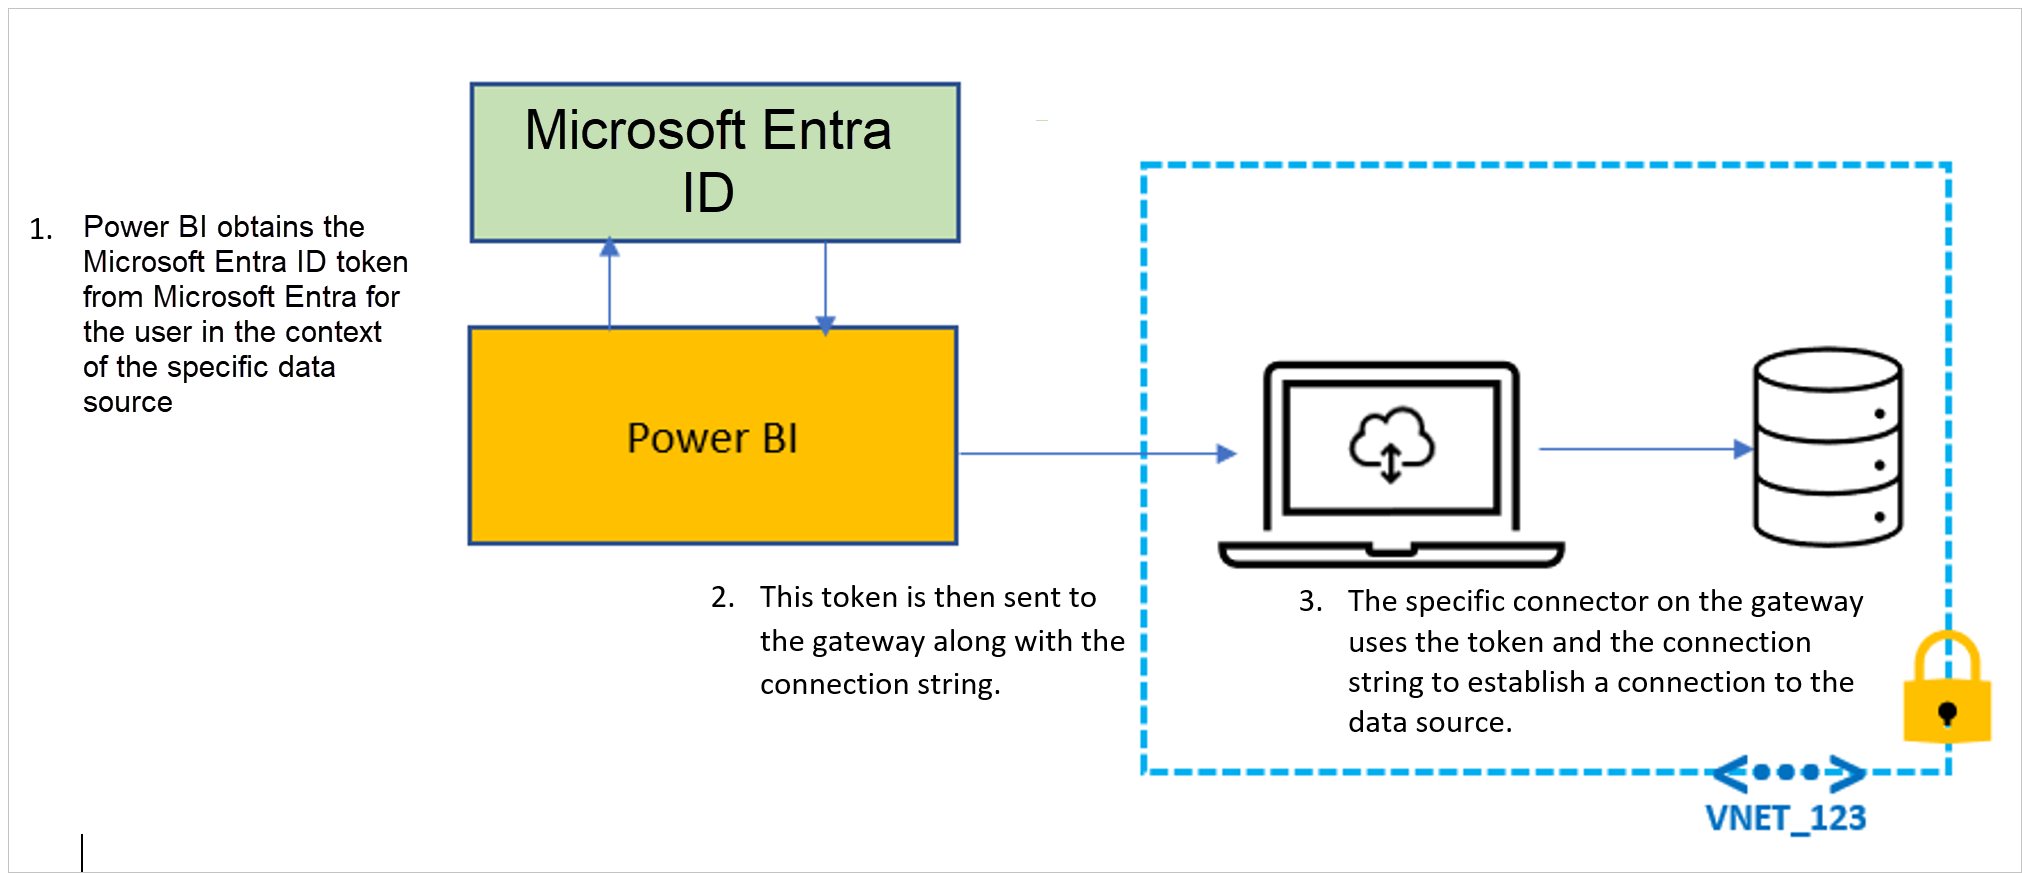 Diagram that shows the path that a Microsoft Entra token takes to establish a connection to the data source.